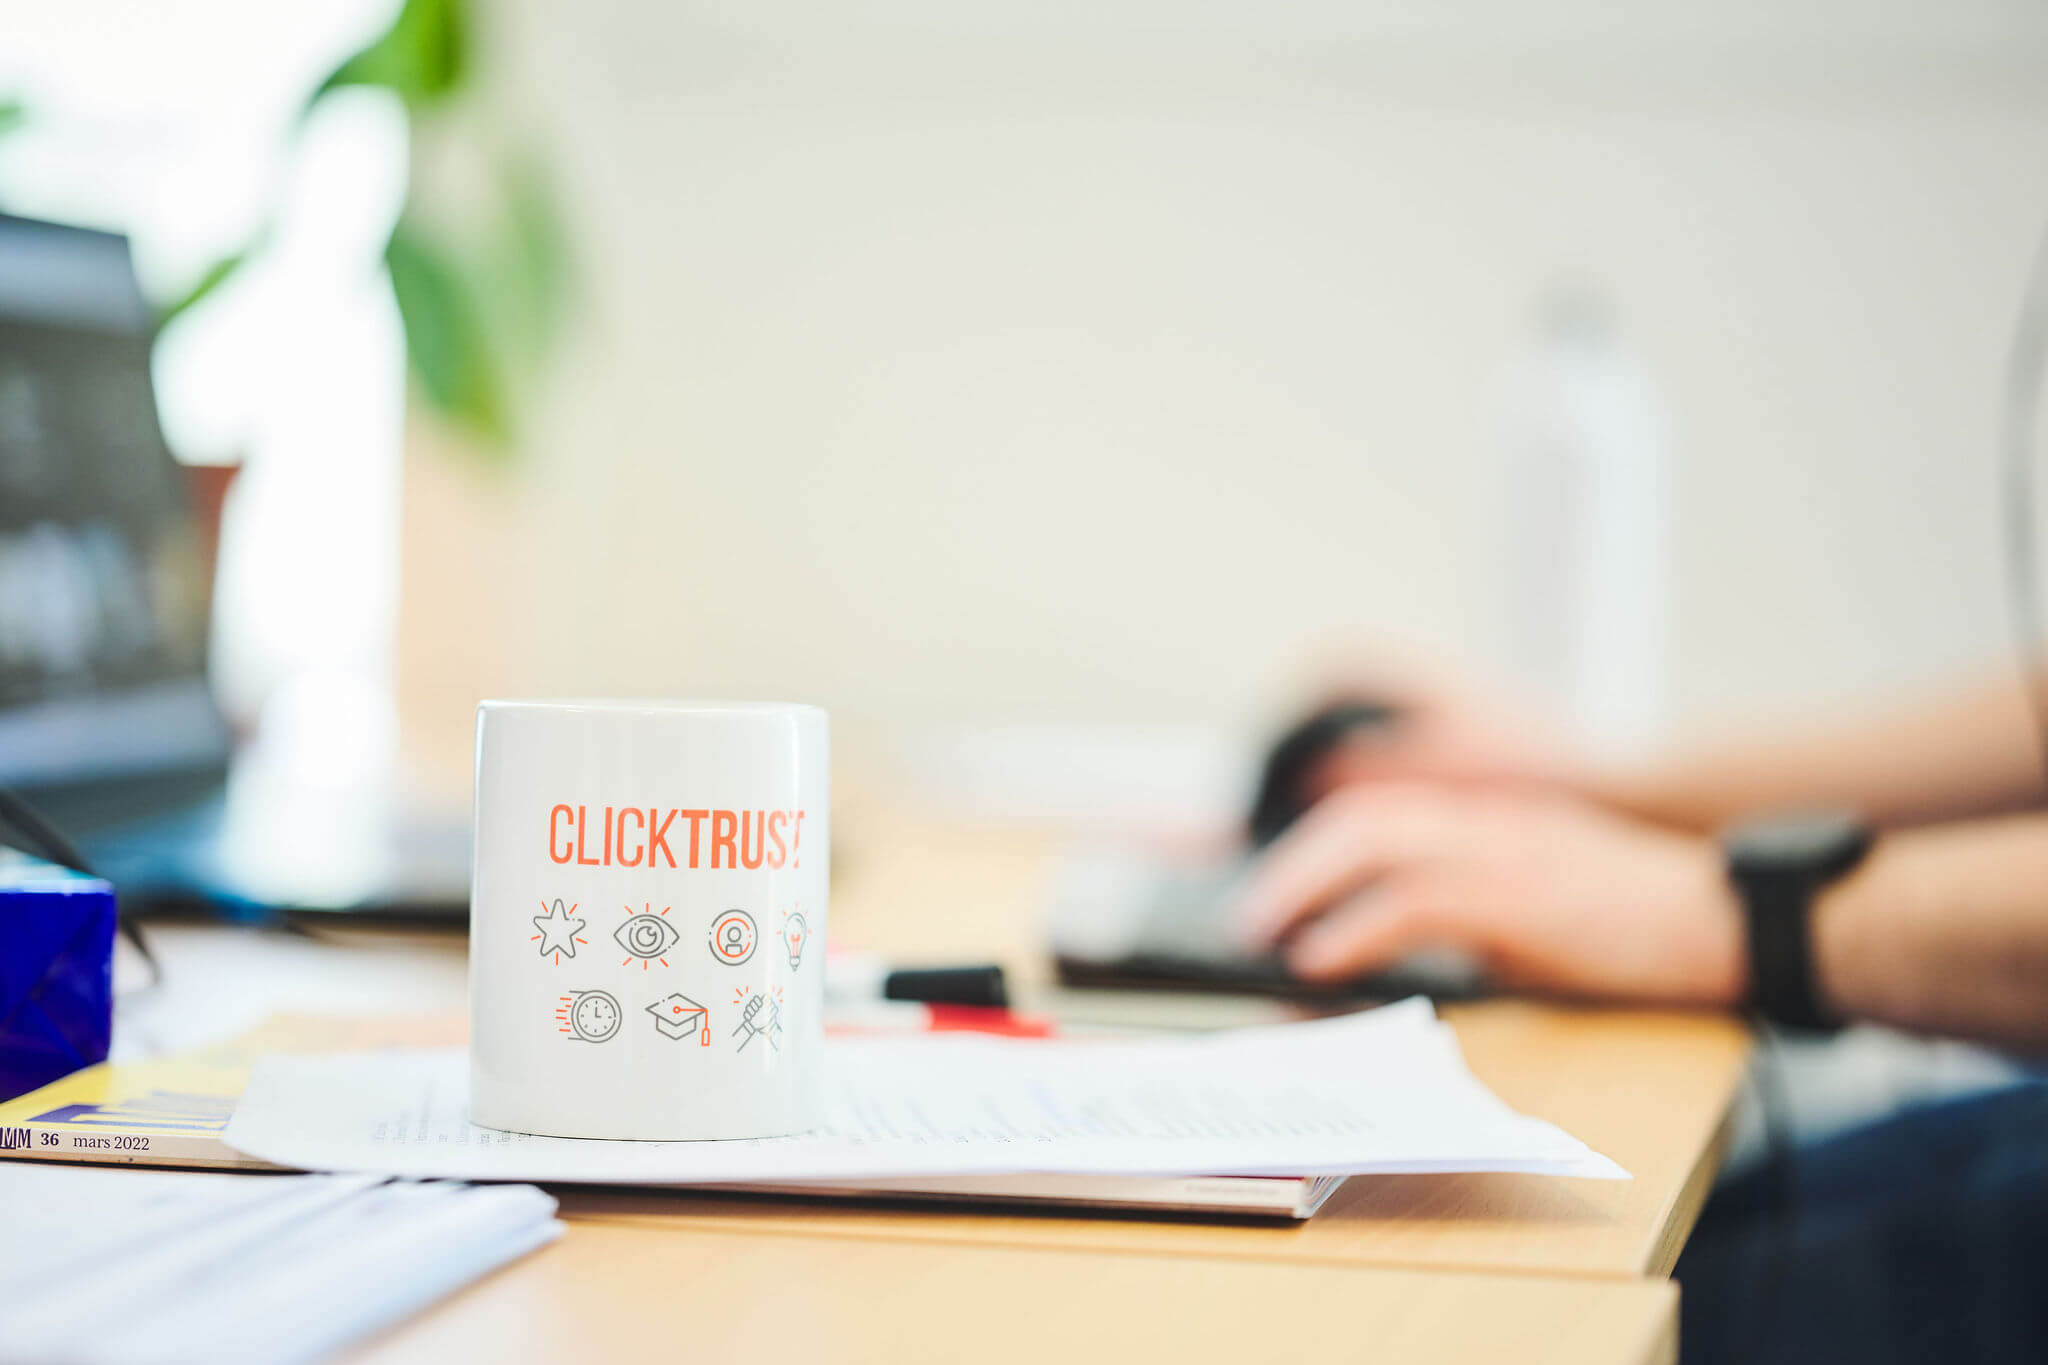 The CLICKTRUST monthly pick – August 2022